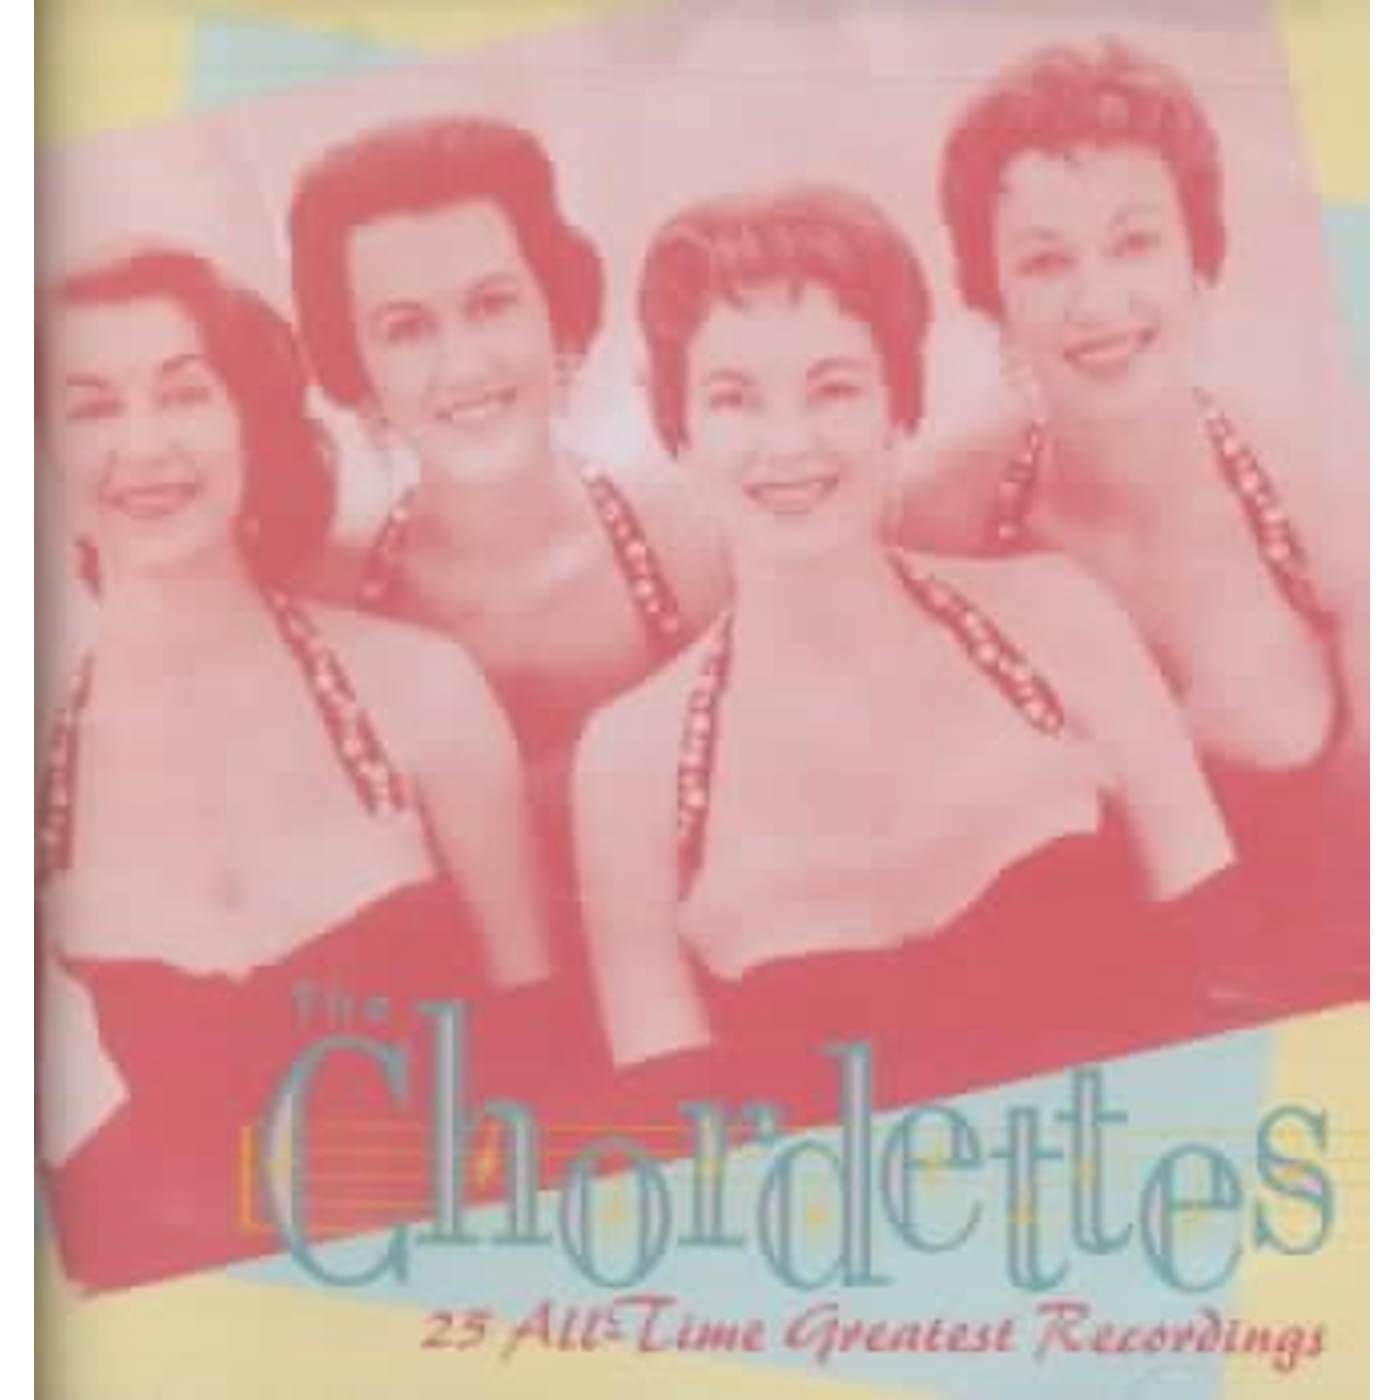 The Chordettes 25 All-Time Greatest Recordings CD